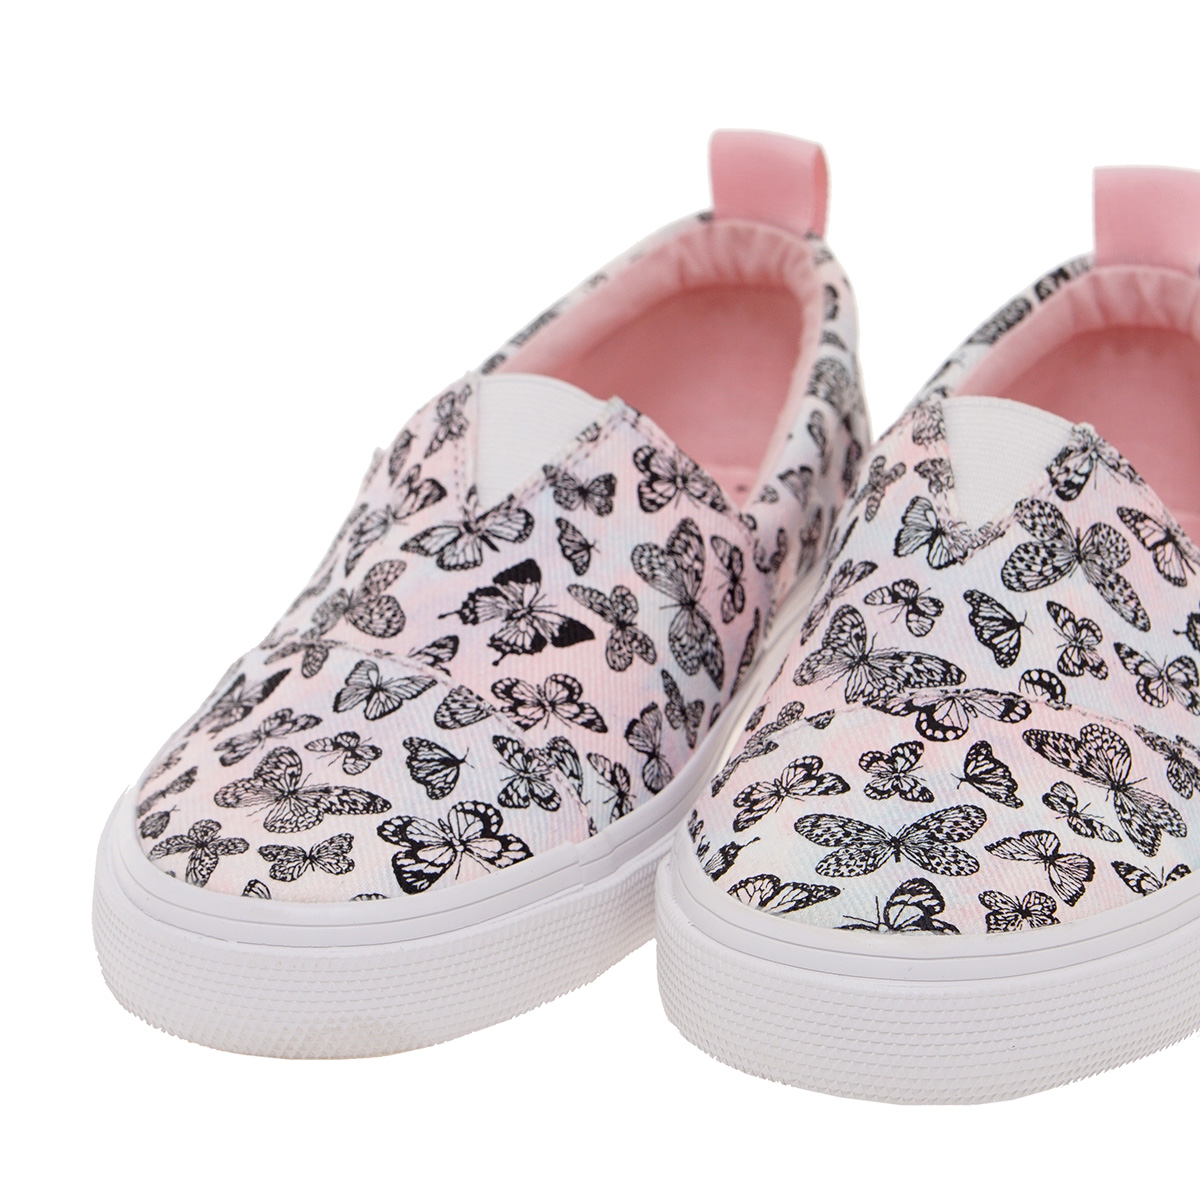 TOMS Girl's shoes - 4